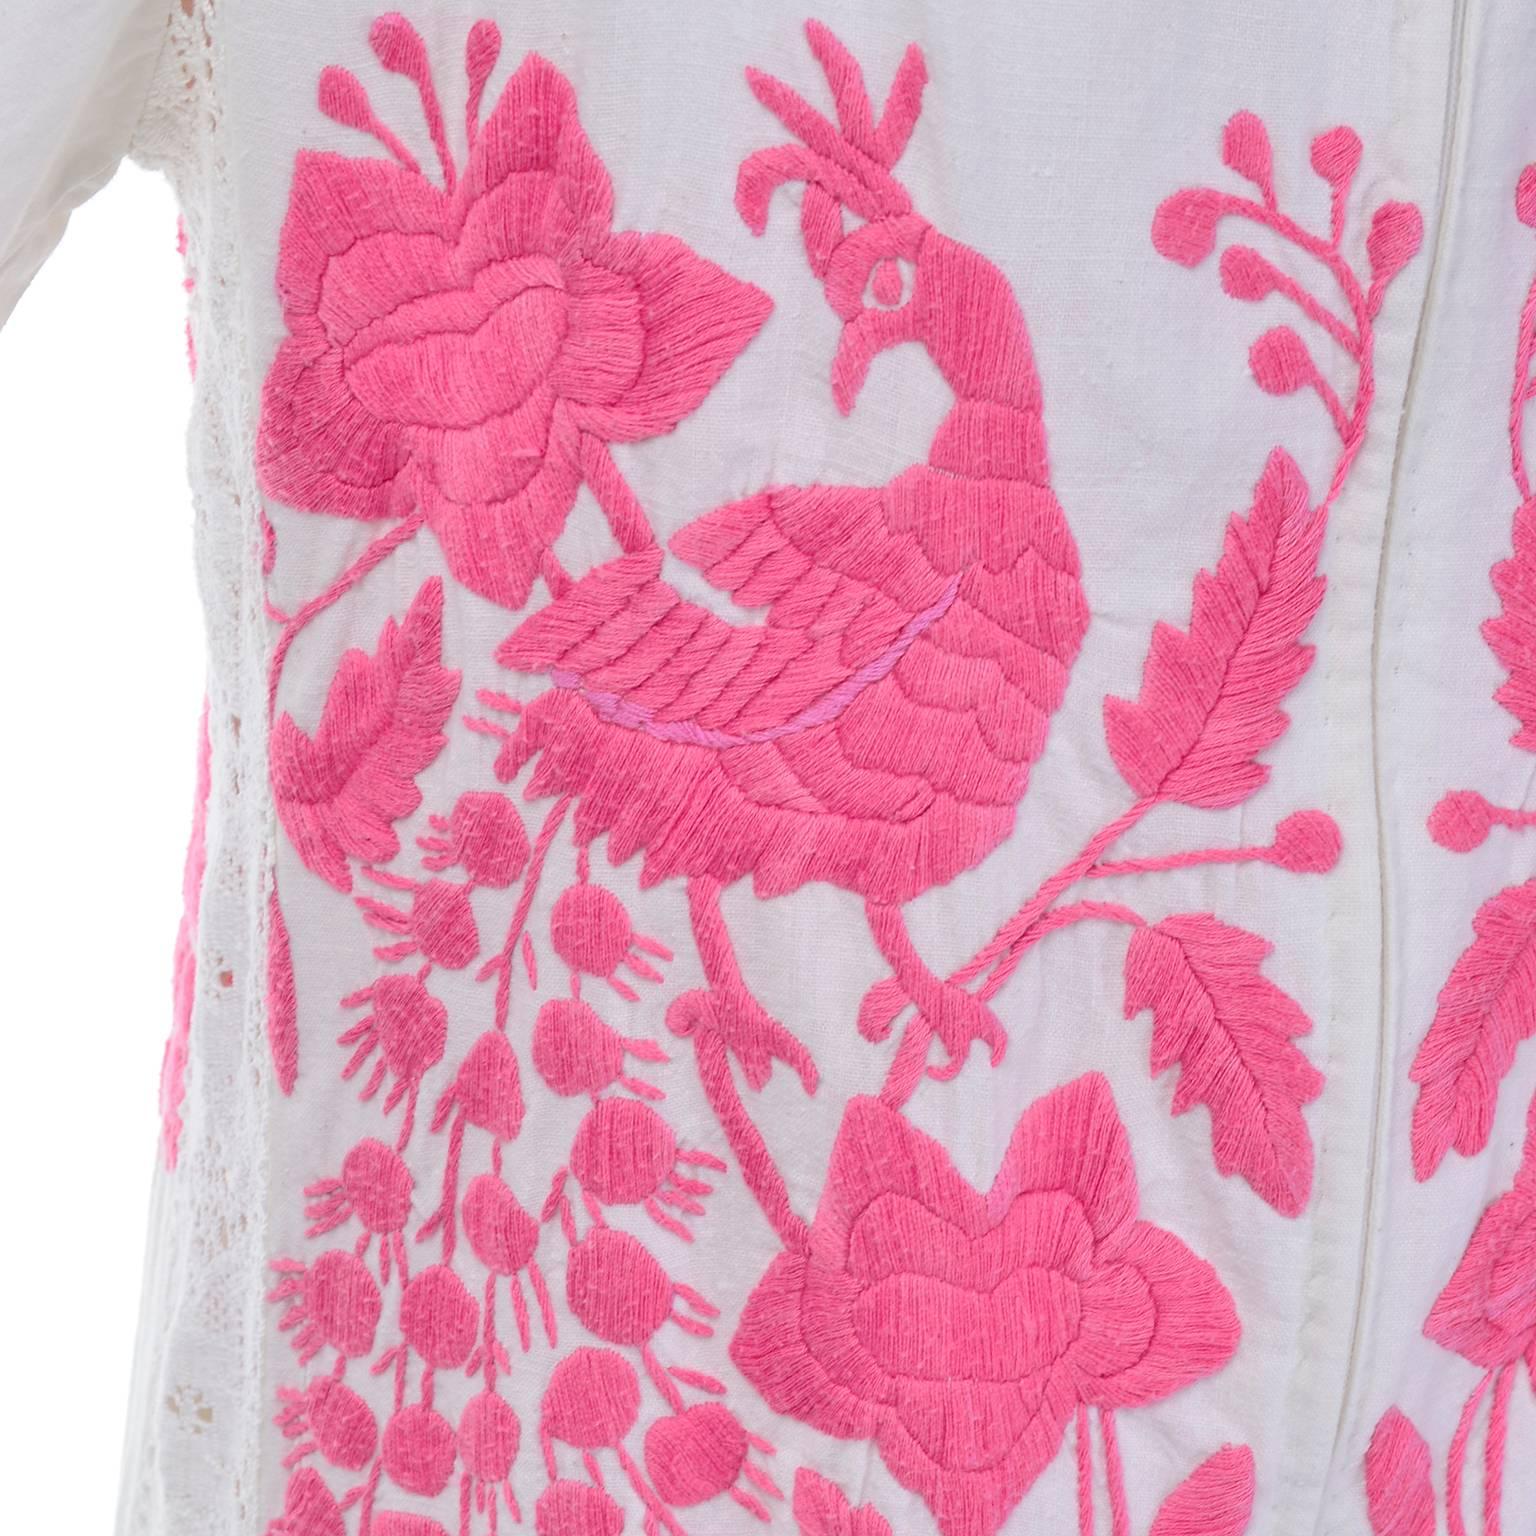 Women's Folk Art Bohemian 1960s Vintage Dress With Embroidered Pink Peacocks 